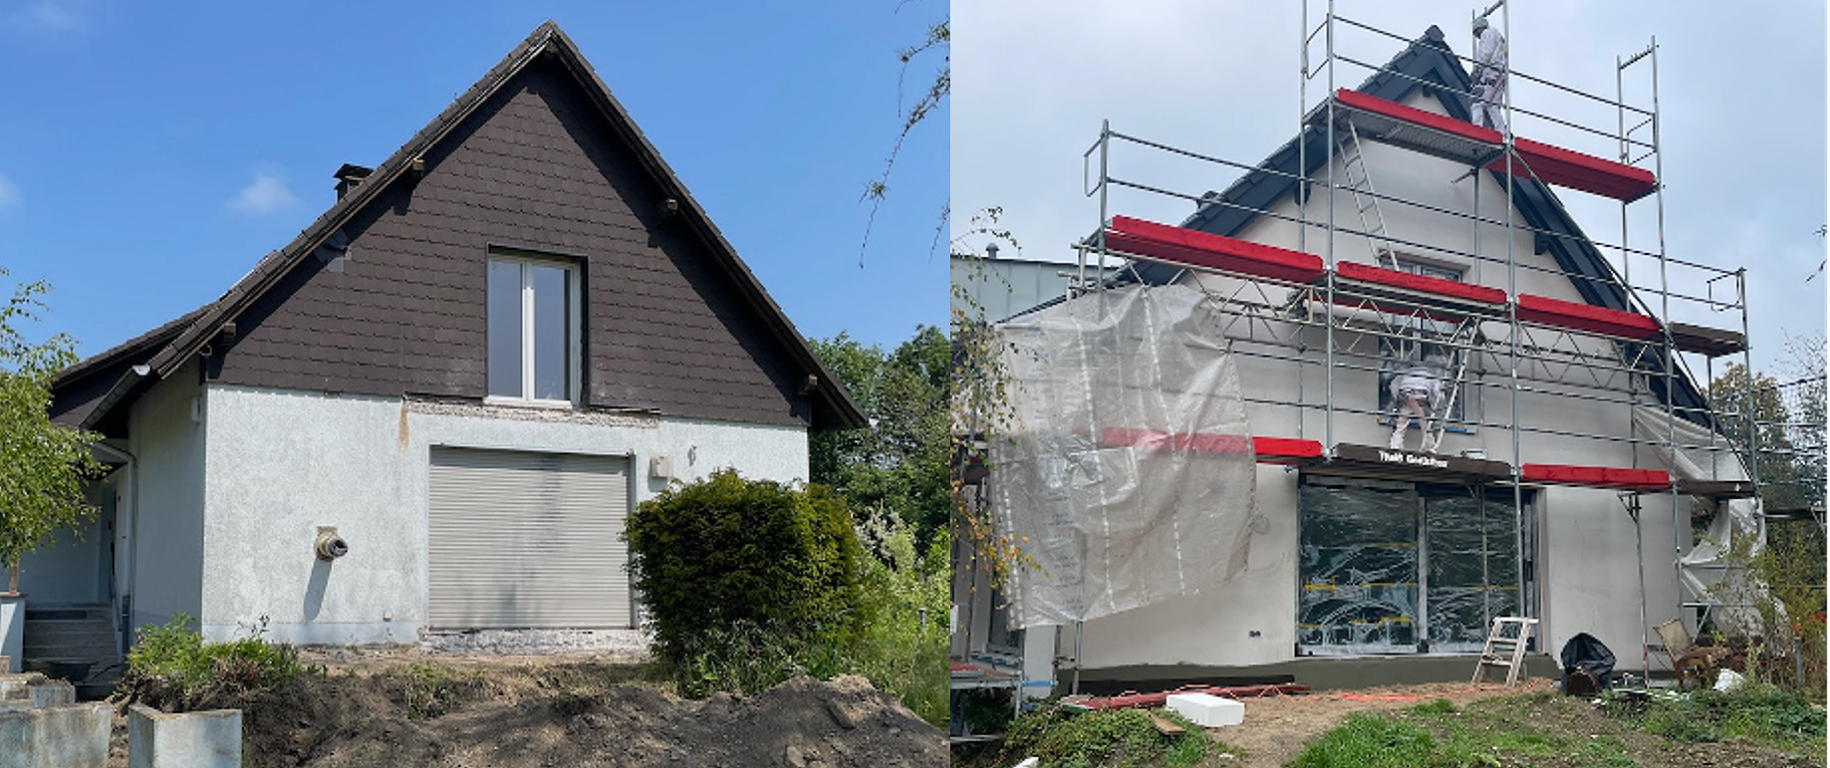 Picture of a single family home before and under renovation